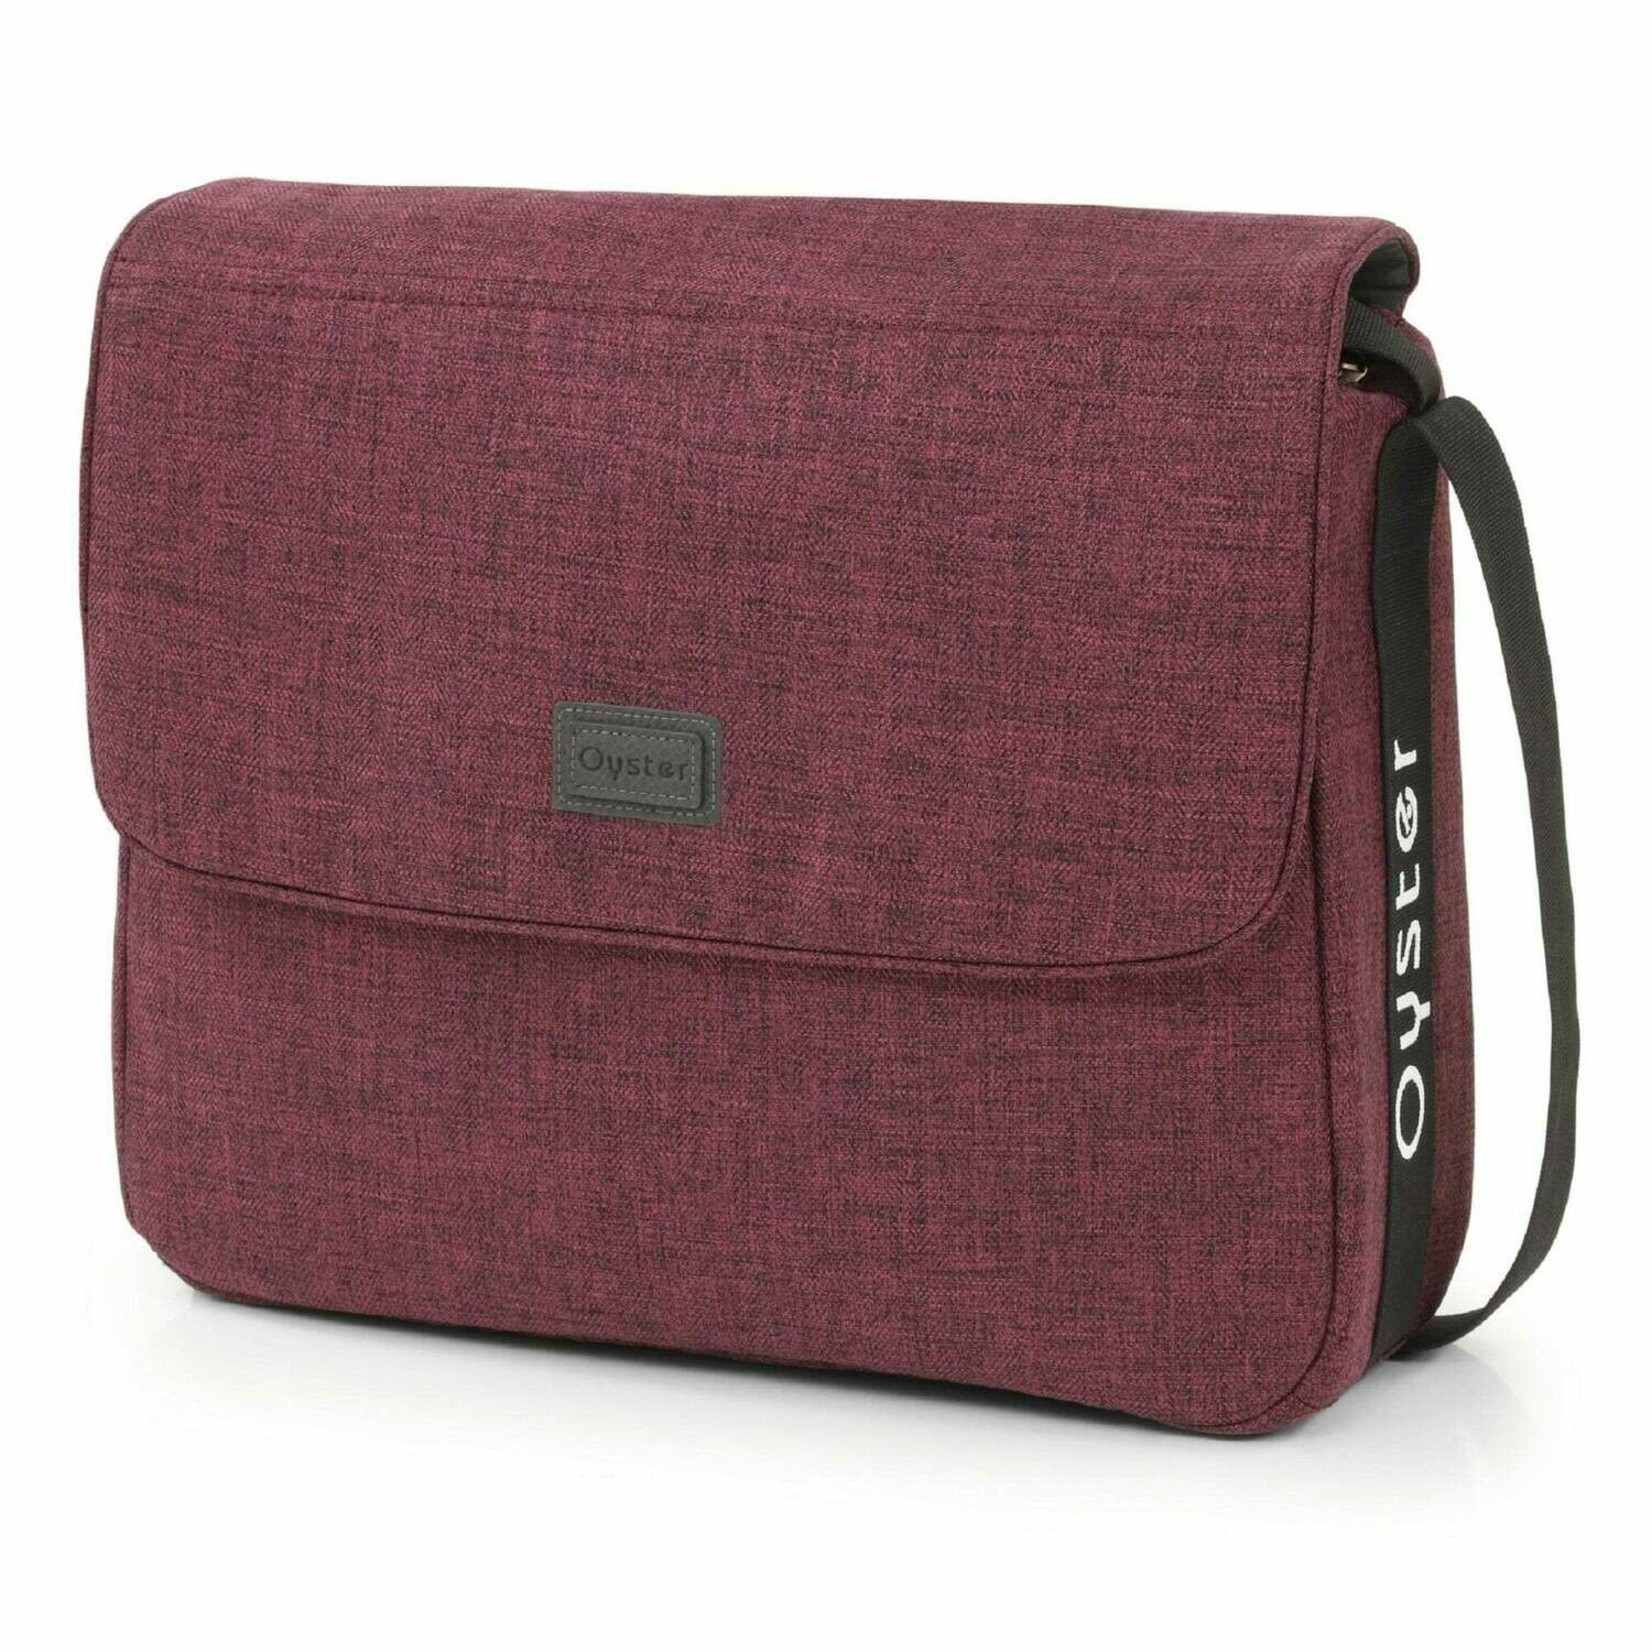 OYSTER BABYSTYLE OYSTER 3 CHANGING BAG BERRY